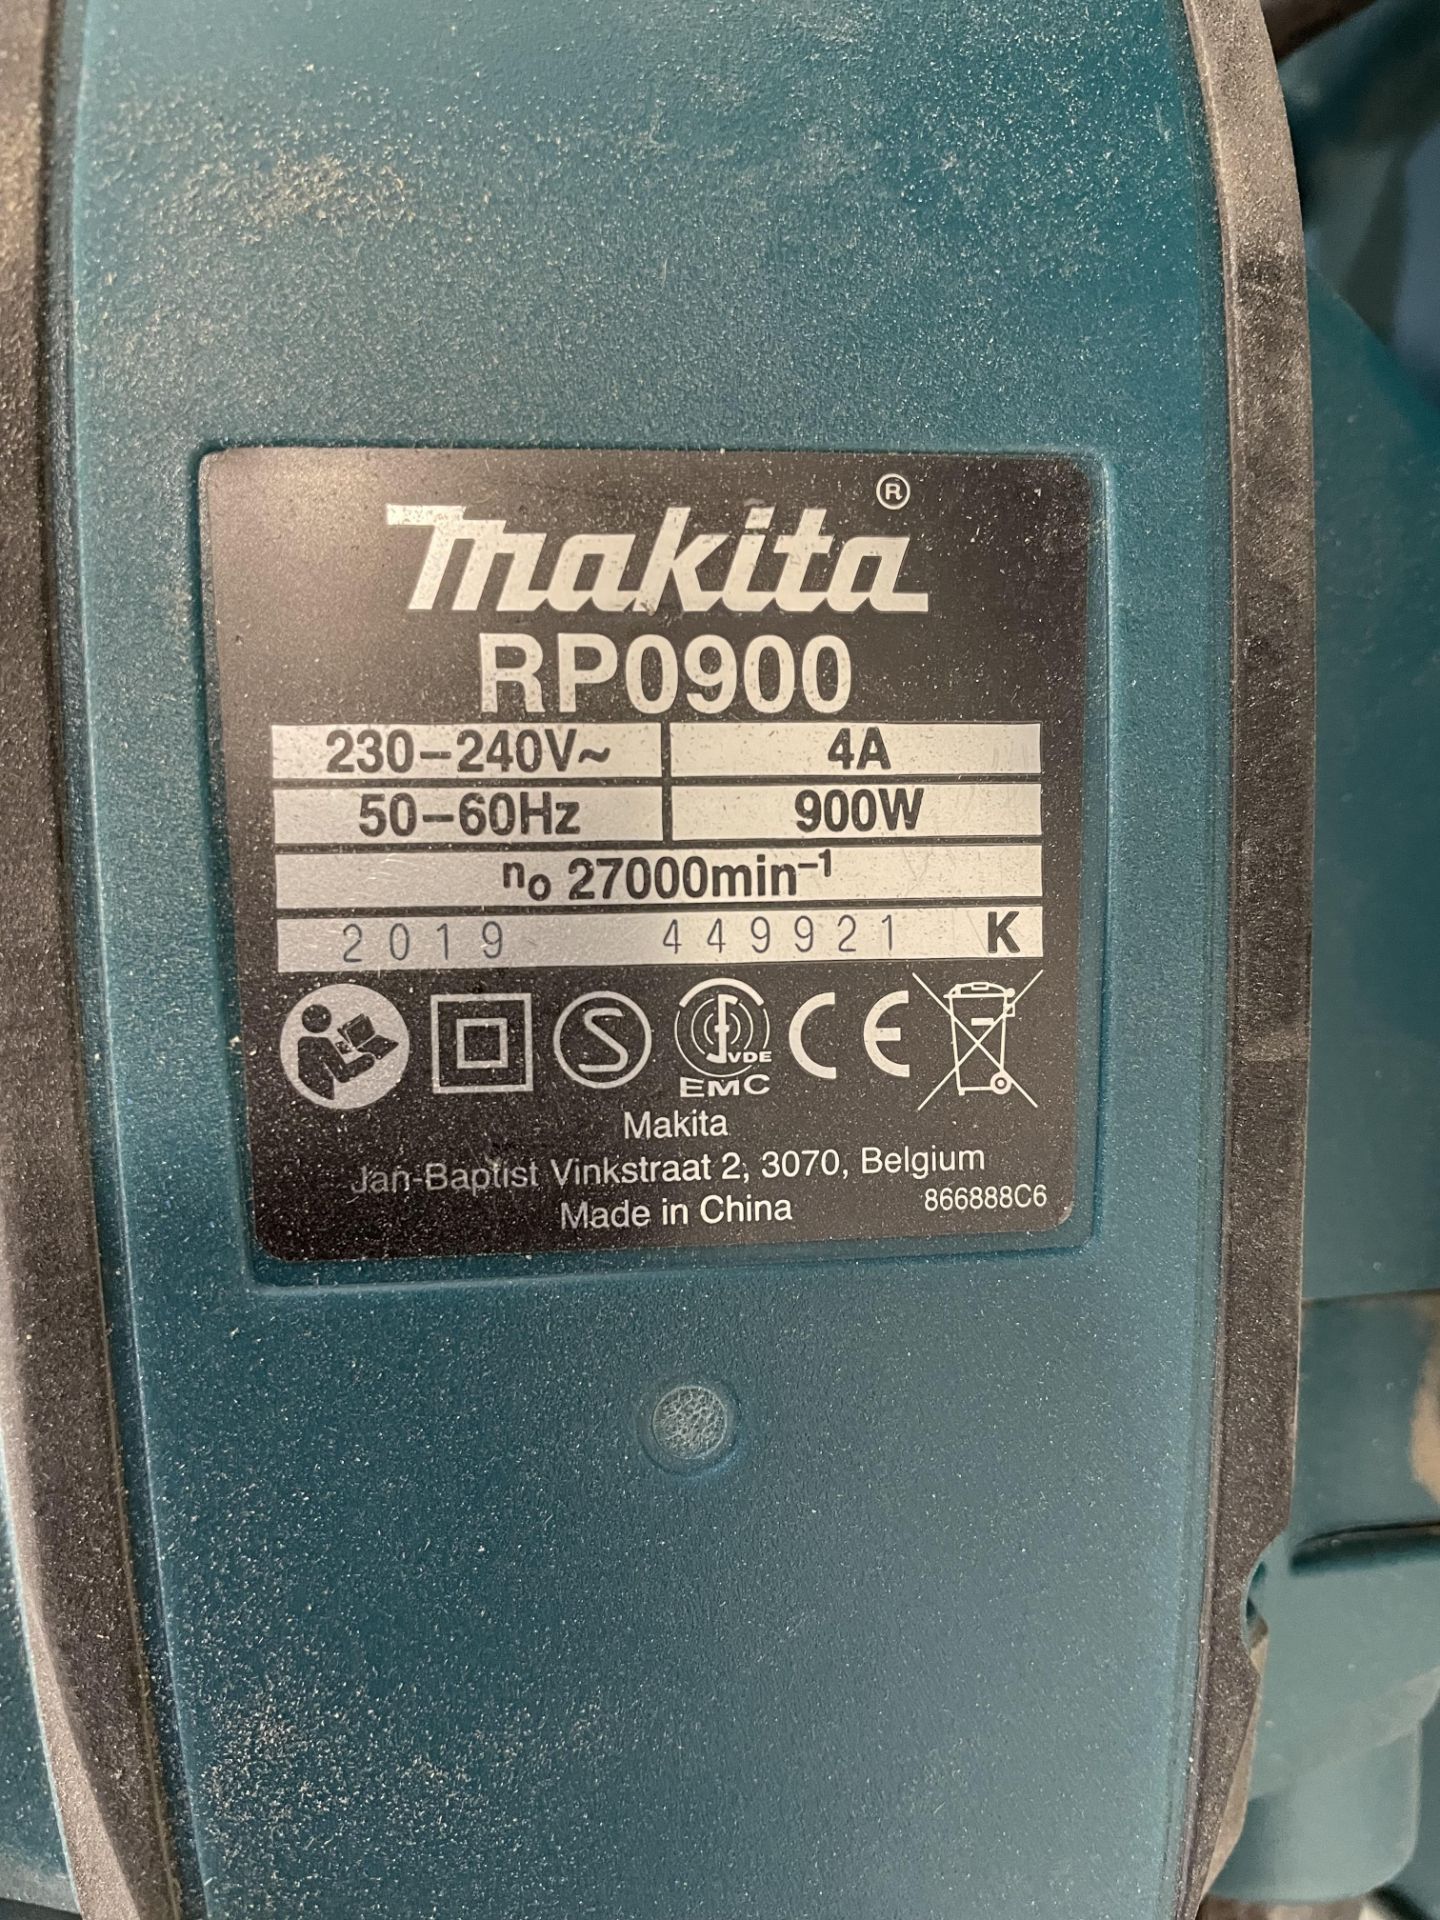 Makita RP0900 Electric Plunge Router 240V w/ Case - Image 4 of 6